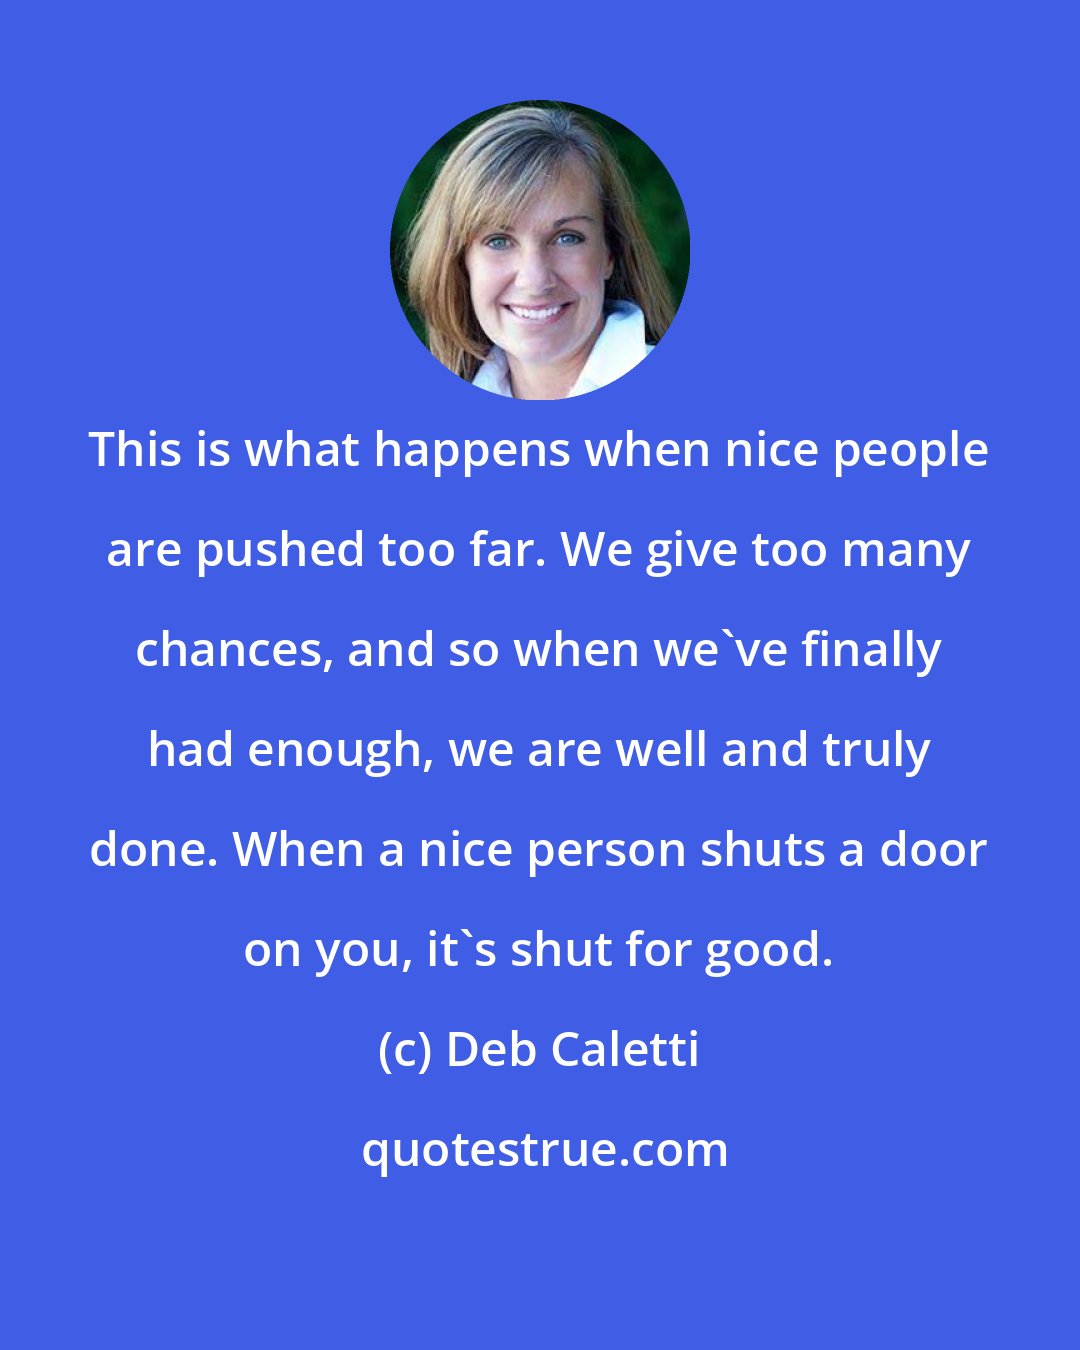 Deb Caletti: This is what happens when nice people are pushed too far. We give too many chances, and so when we've finally had enough, we are well and truly done. When a nice person shuts a door on you, it's shut for good.